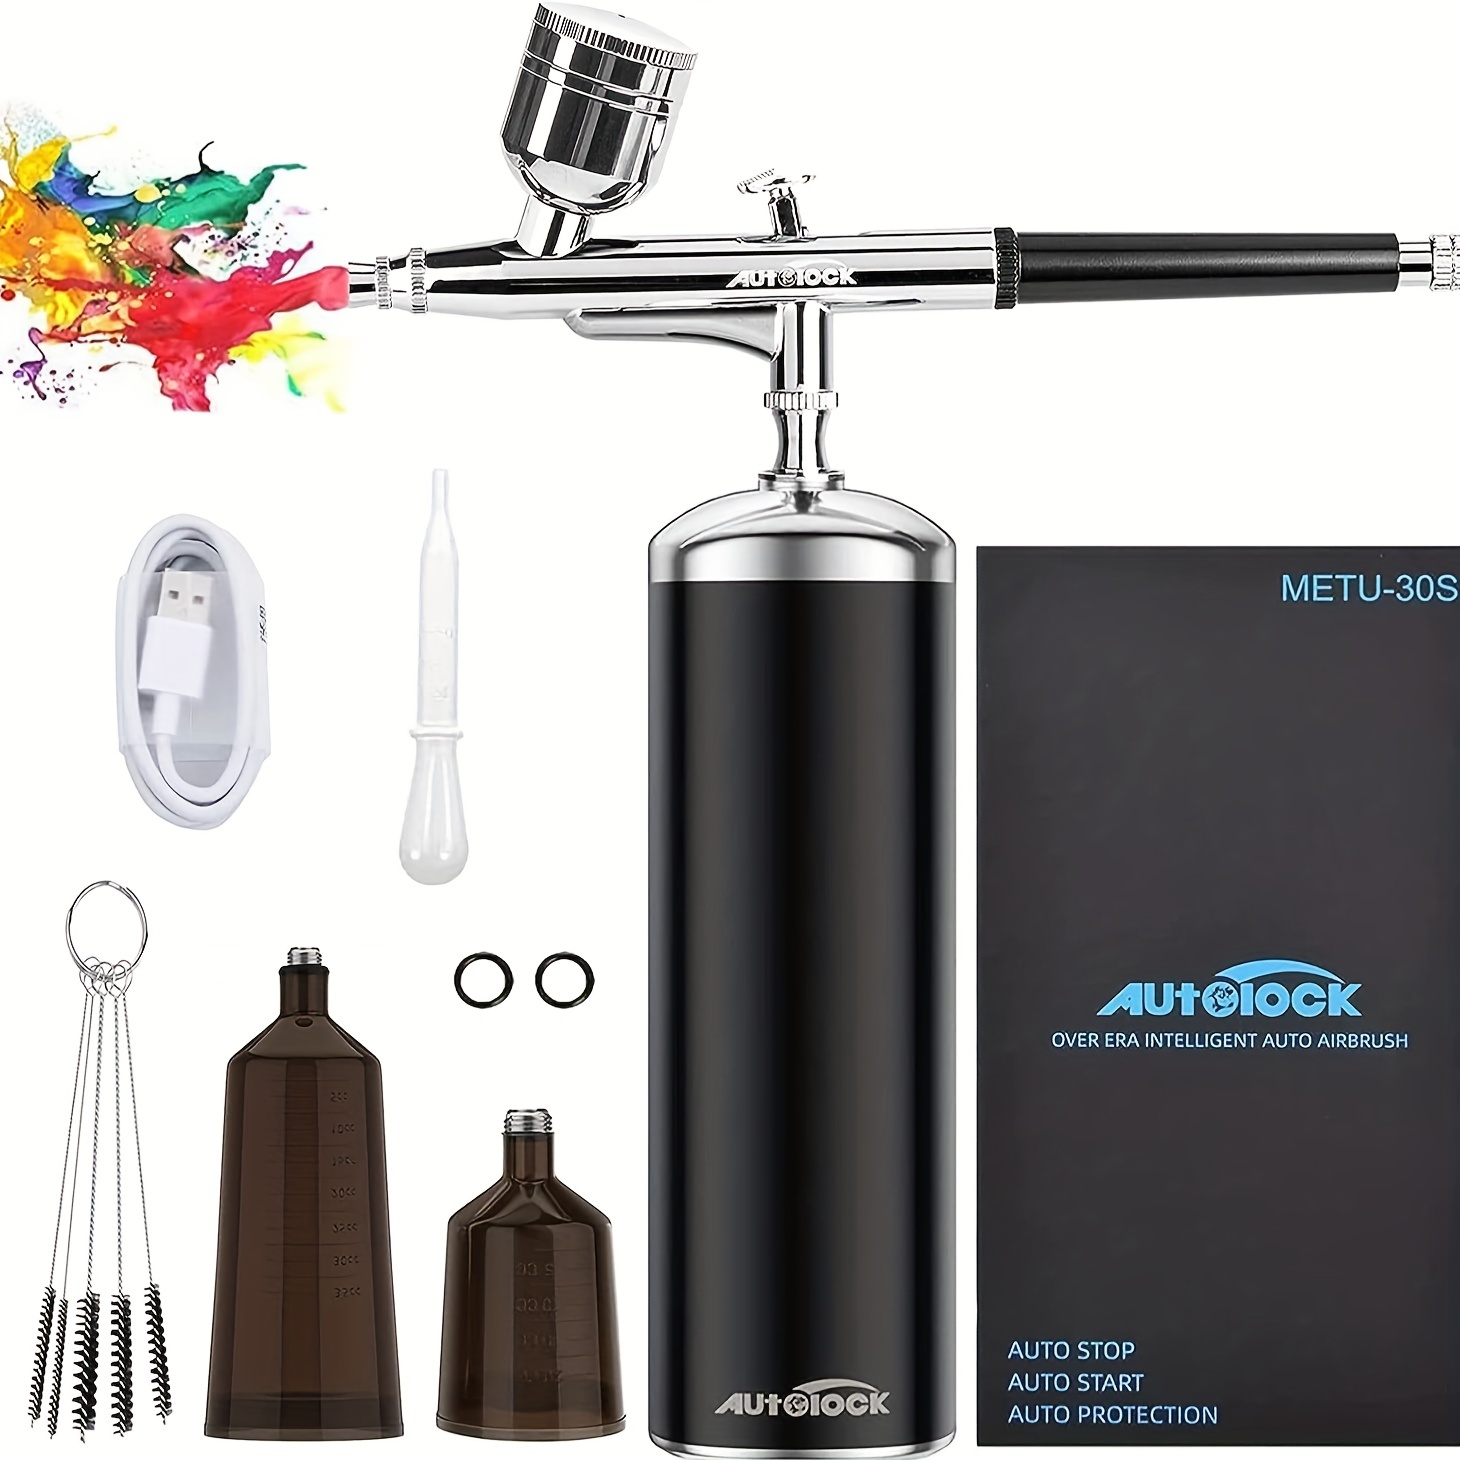 Upgraded Airbrush Kit With Air Compressor, Portable Cordless Auto Airbrush  Gun Kit, Rechargeable Handheld Airbrush Set For Makeup, Cake Decor, Model C